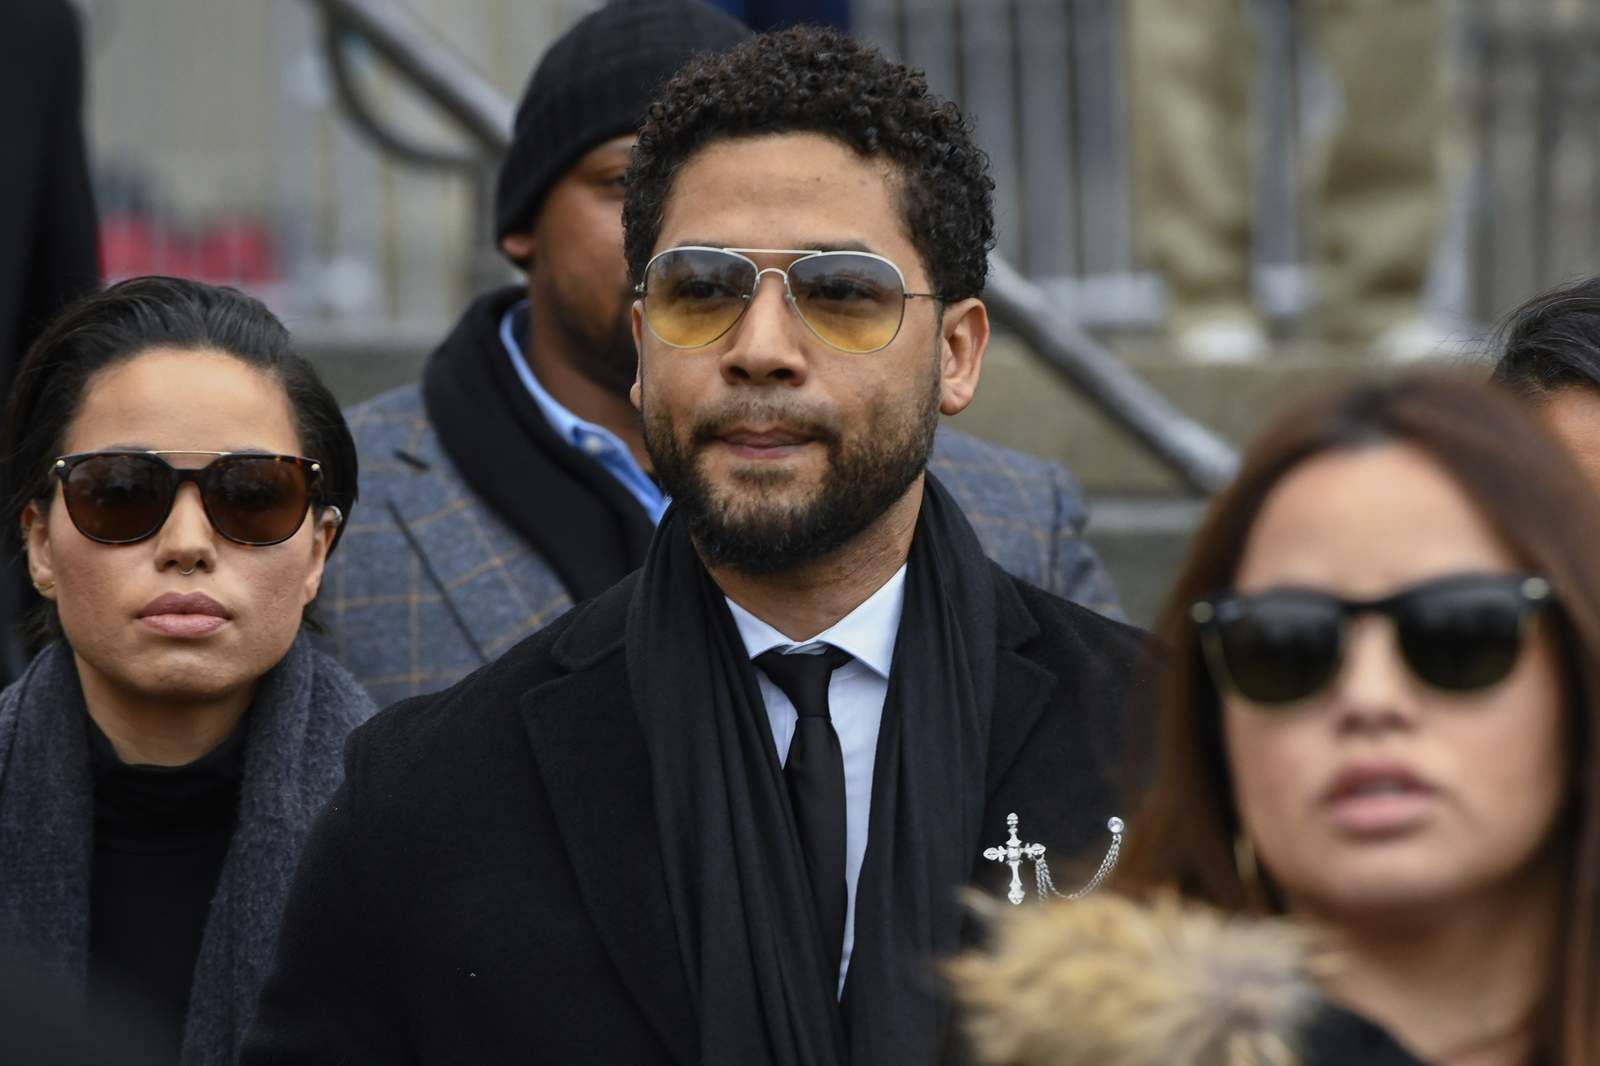 2 brothers threaten to stop cooperating in Smollett case